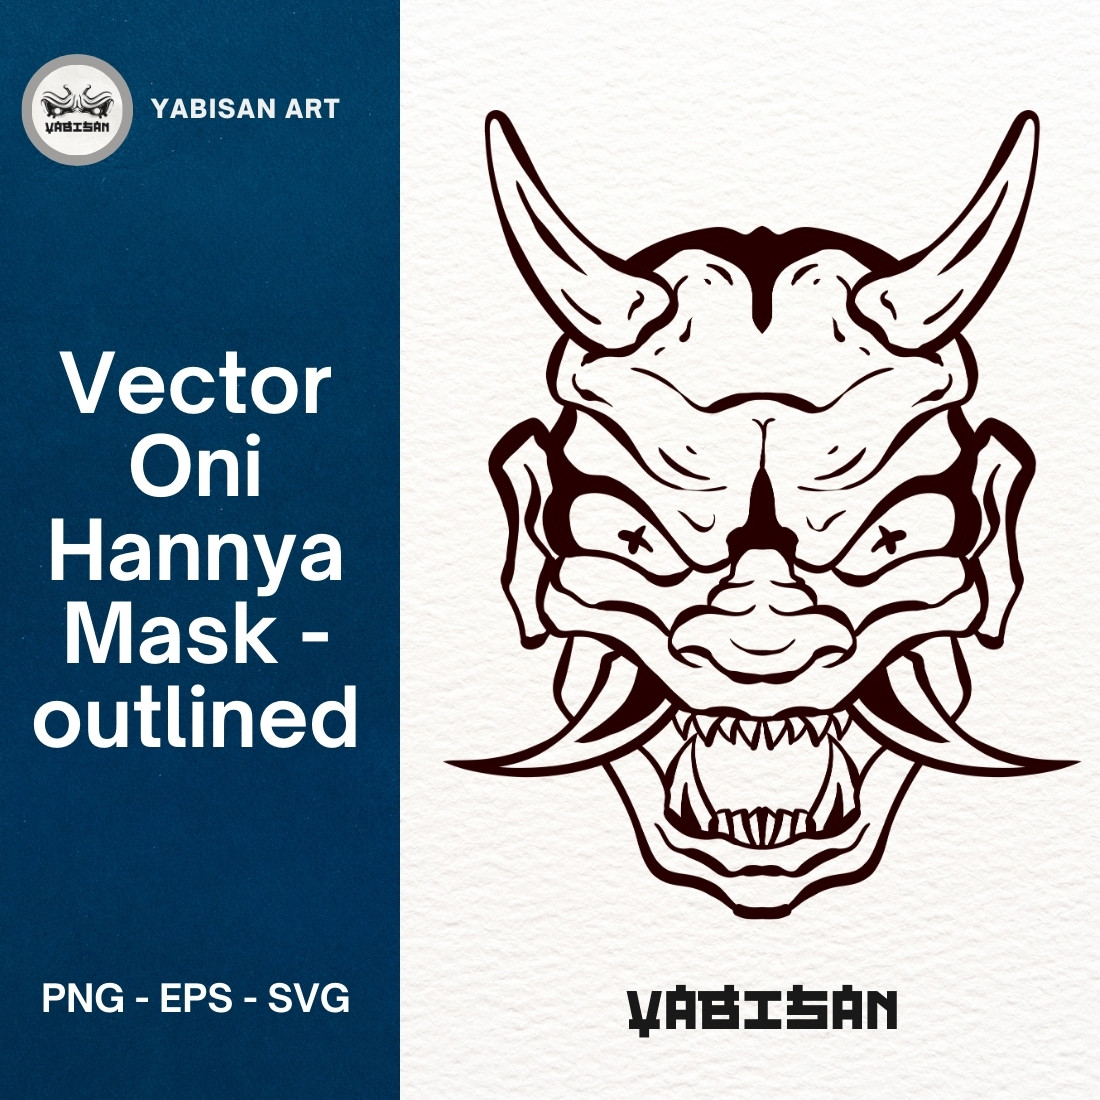 Oni Hannya Mask Art 2 – Outlined preview image.